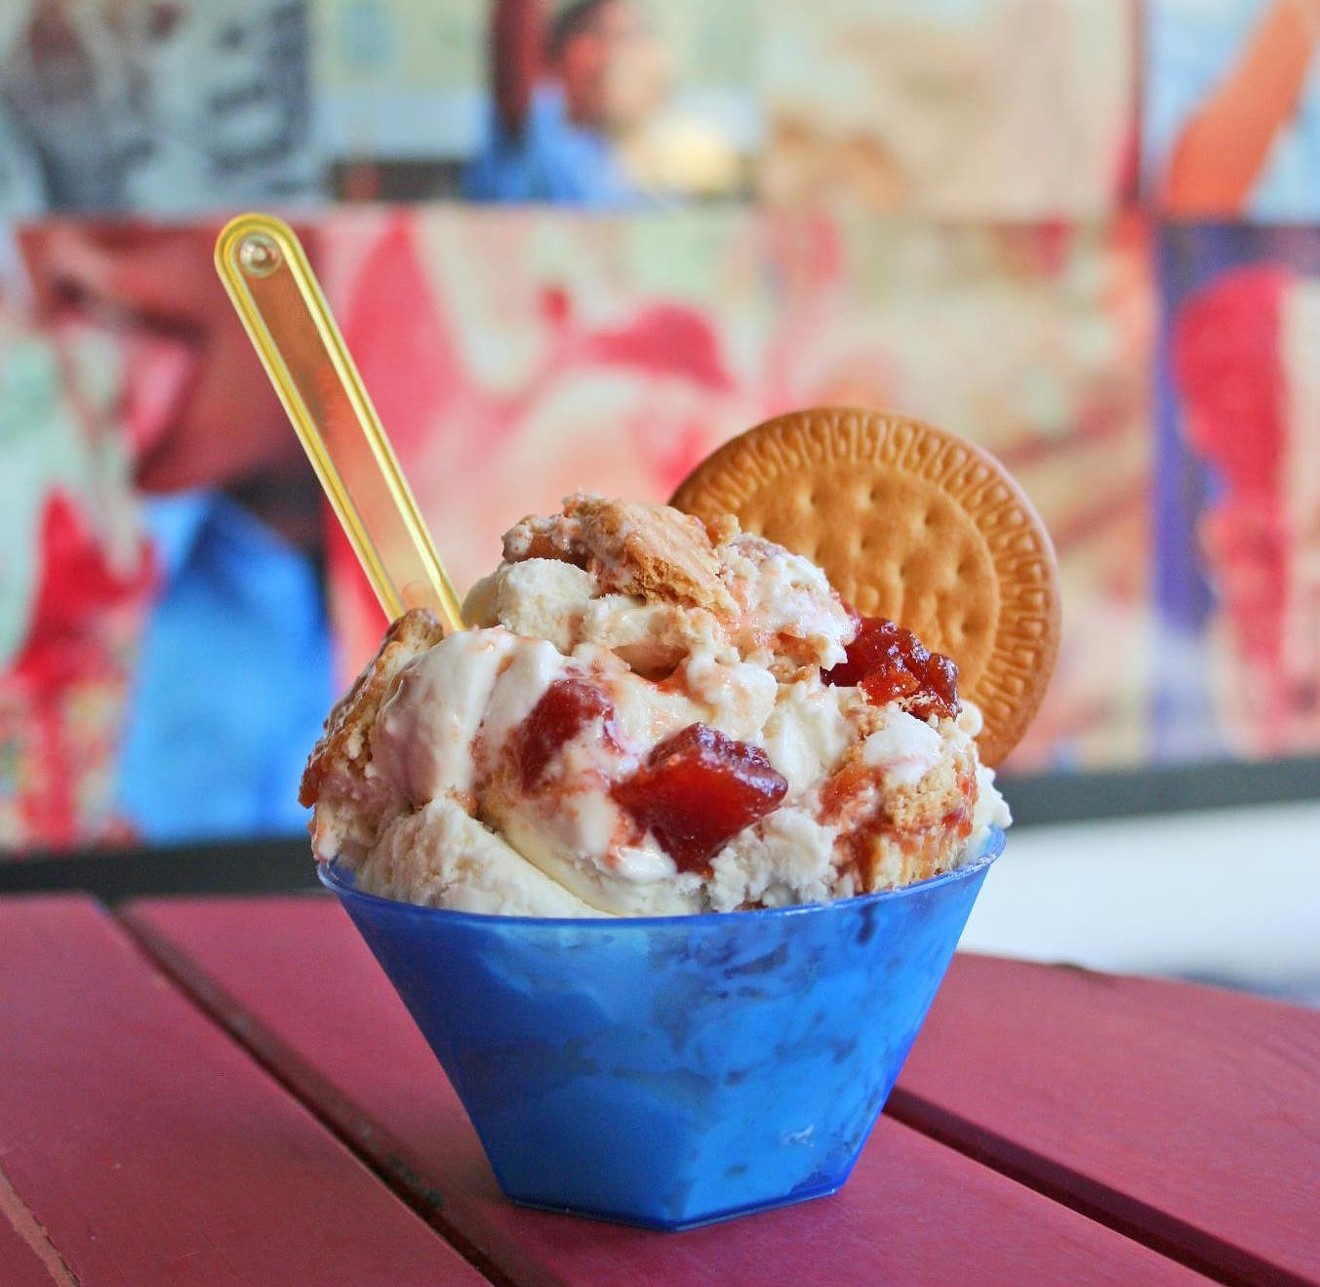 The famous Abuela Maria ice cream from Azucar.